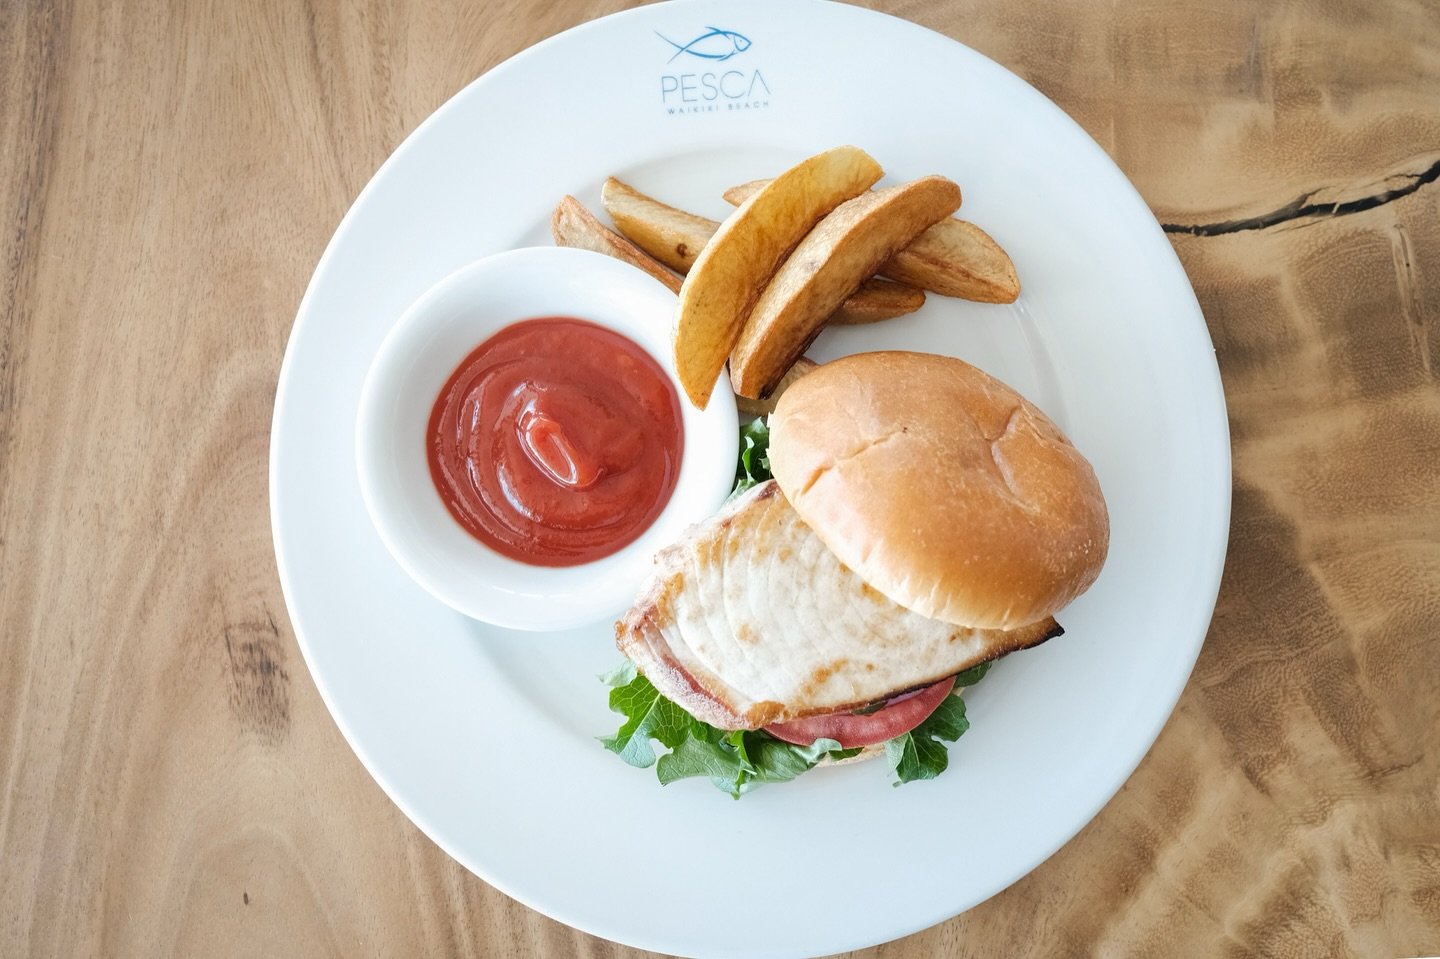 Try our signature PESCA Burger featuring baked fresh catch, brioche bun, lettuce, tomato, red onion, pickles, house horseradish sauce, and wedge potato fries. Available daily during lunch from 11am &ndash; 3pm!

🐟 Book your reservations today on Ope